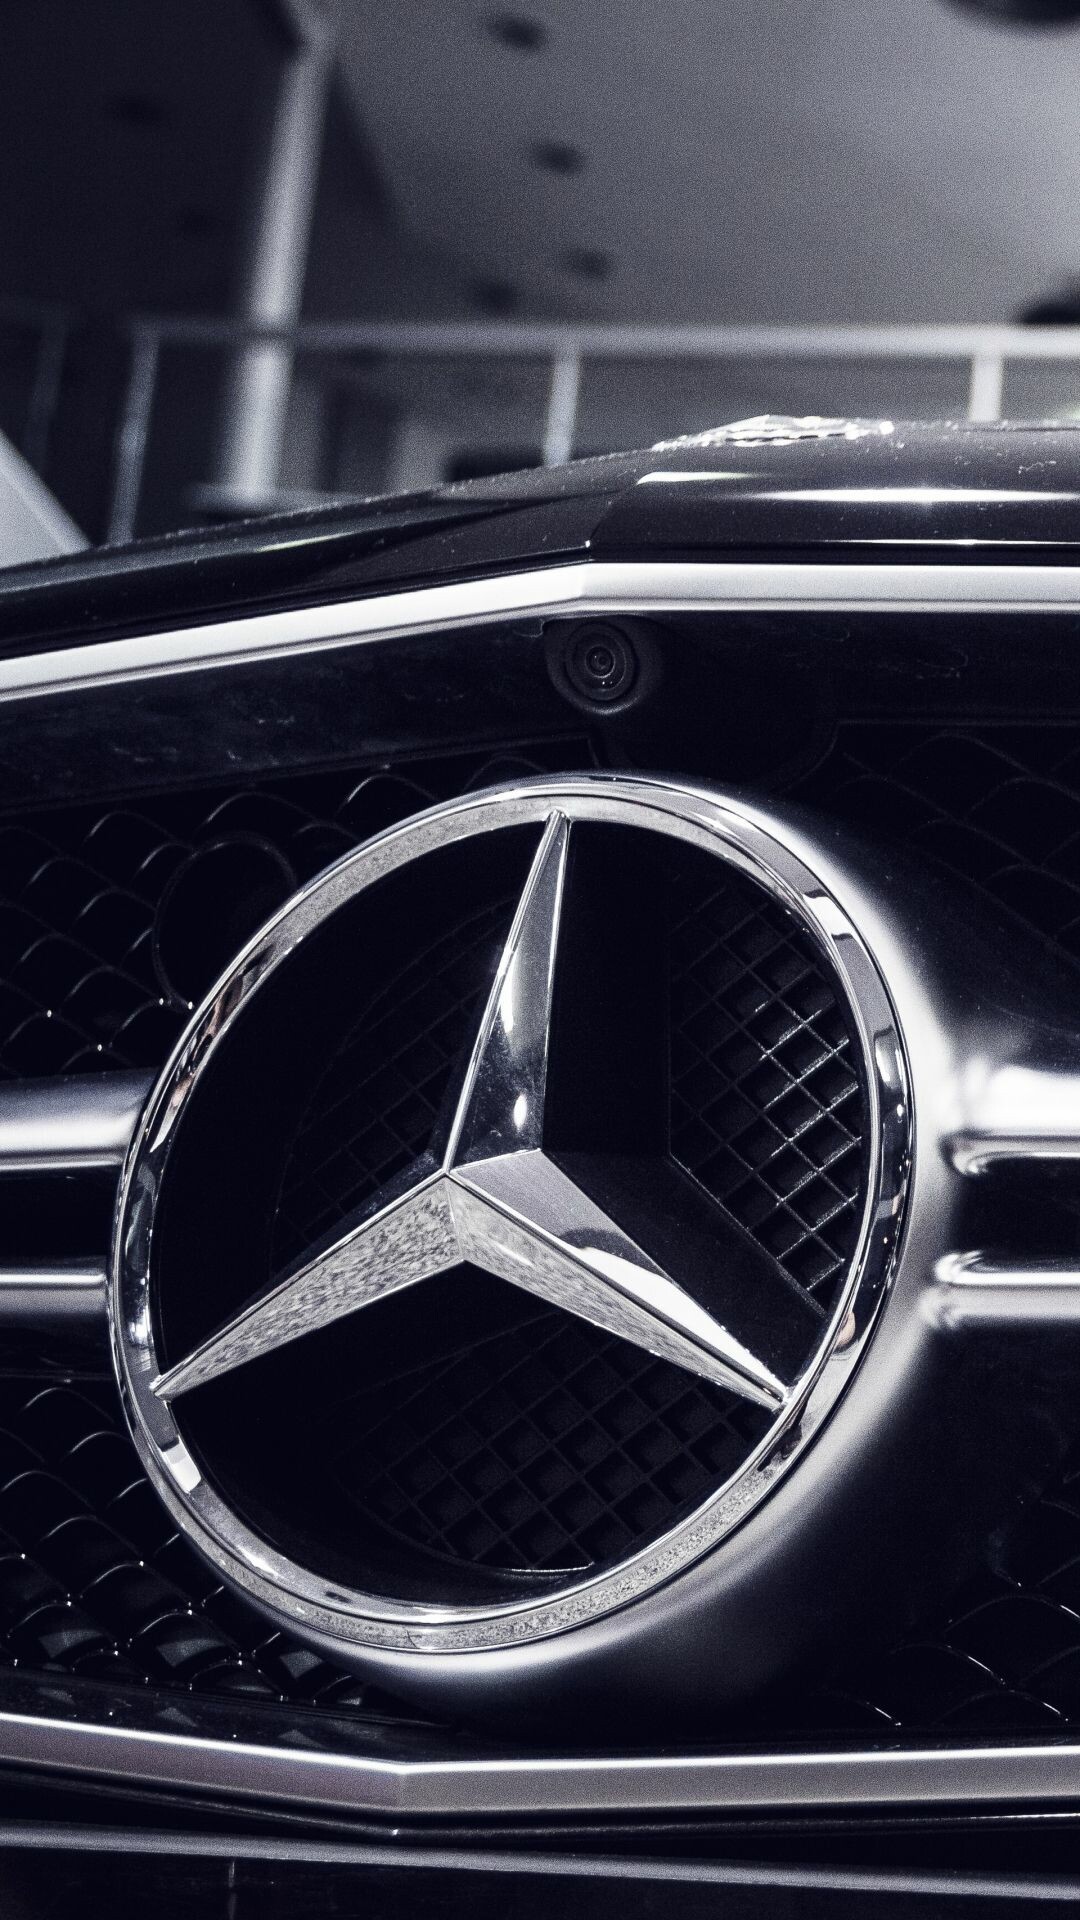 Mercedes-Benz: The logo symbolizes the use of Daimler engines on land, at sea and in the air. 1080x1920 Full HD Background.